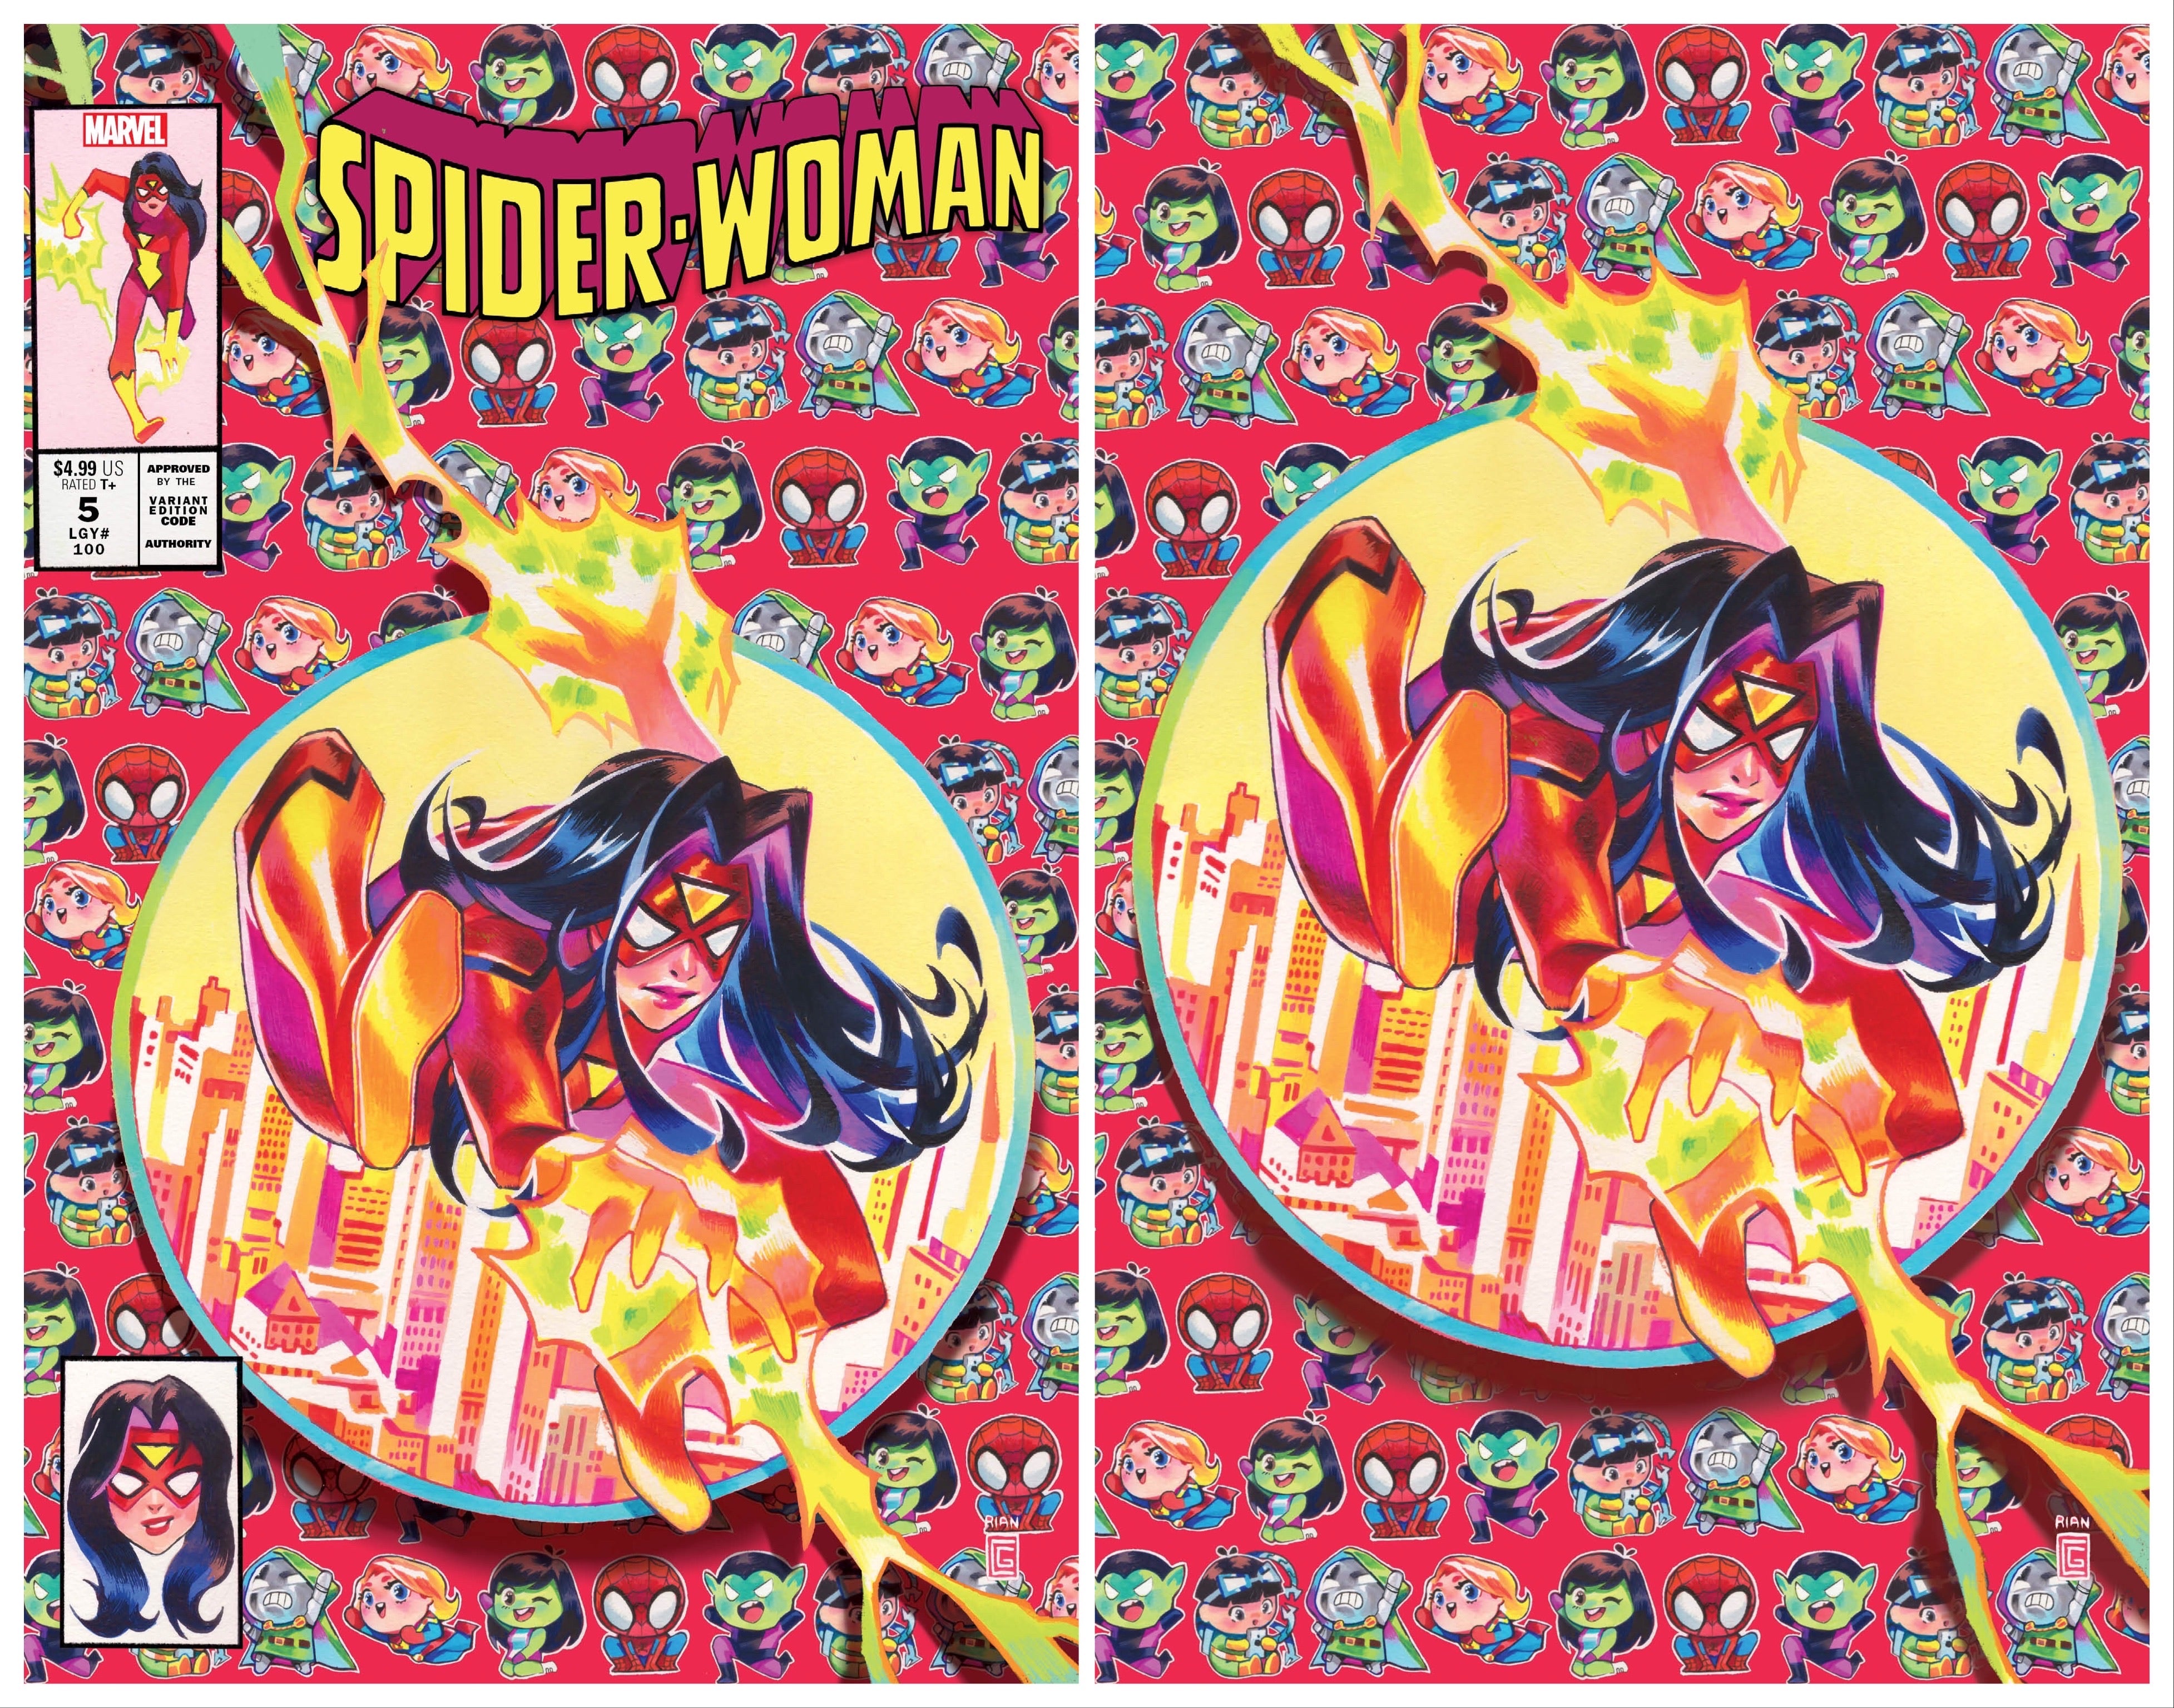 SPIDER-WOMAN #5 RIAN GONZALES EXCLUSIVE VARIANT